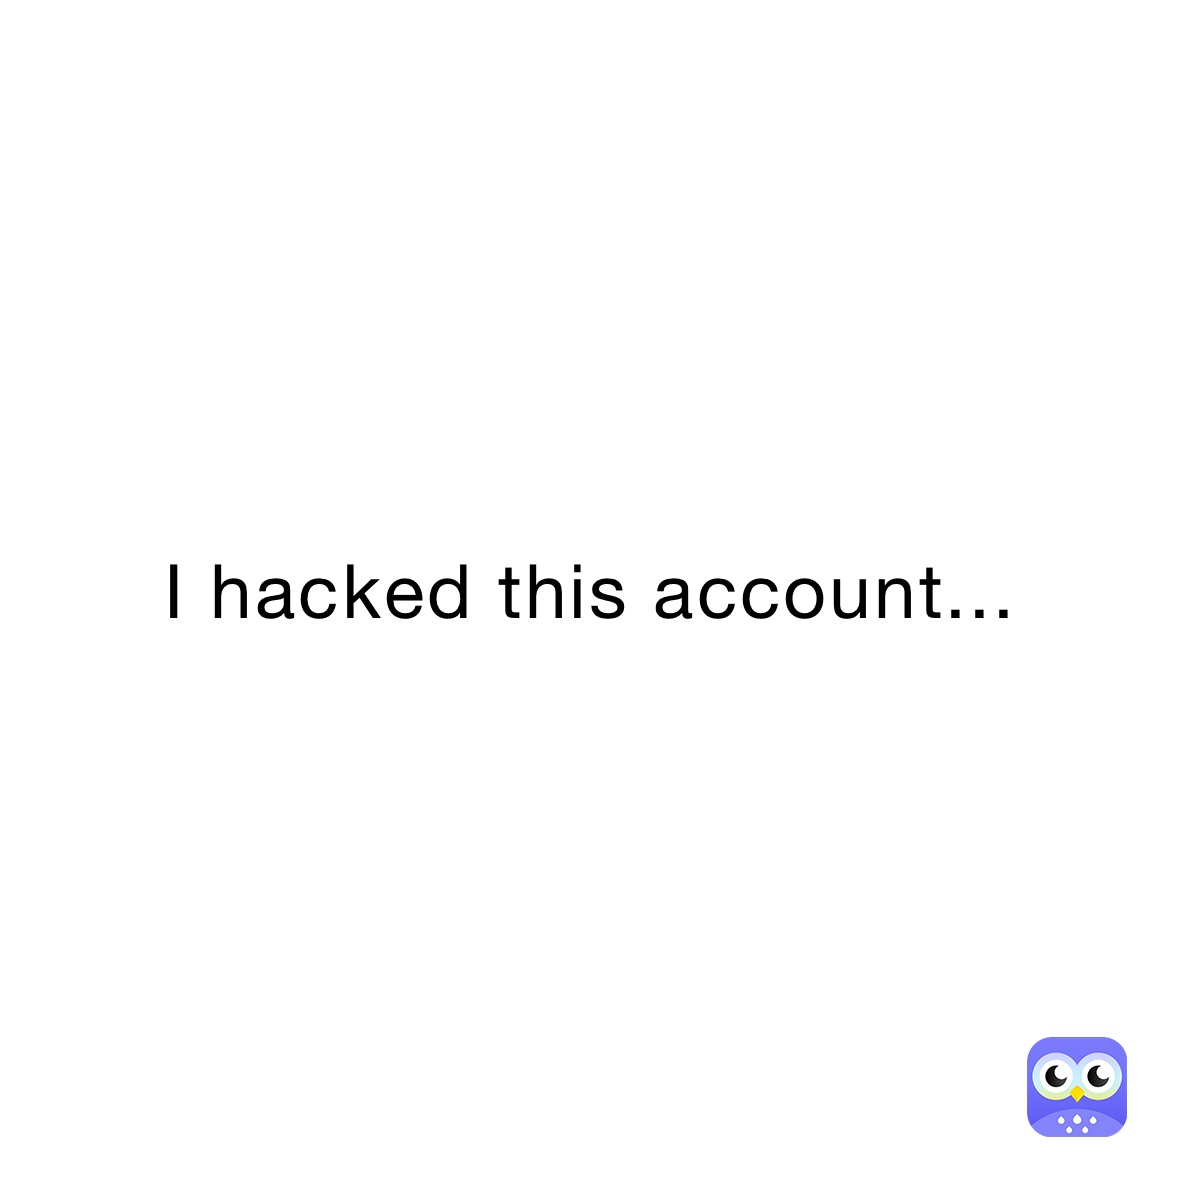 I hacked this account...